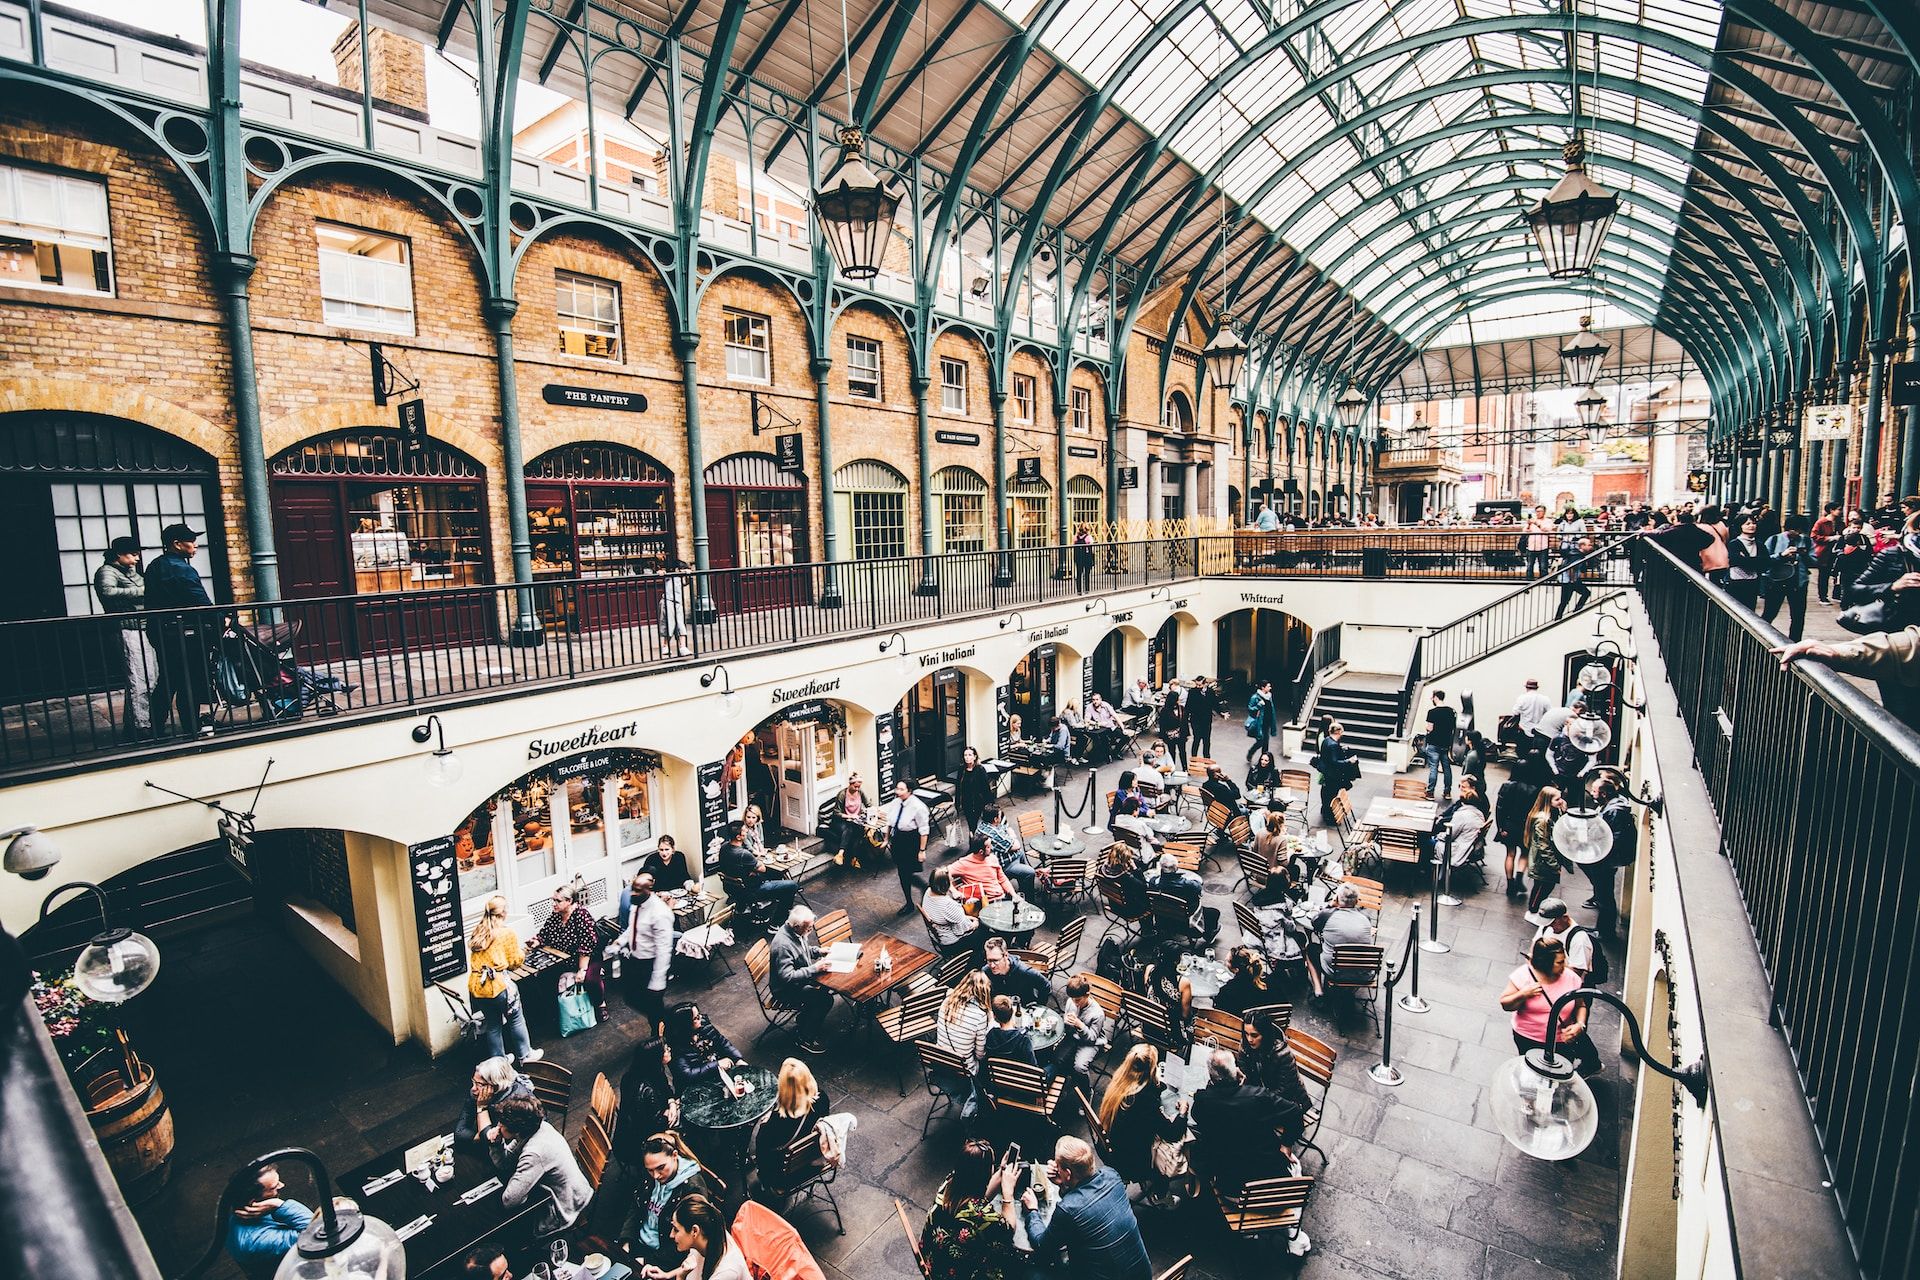  Tourists, restaurants, and shops at the Covent Garden Market, London